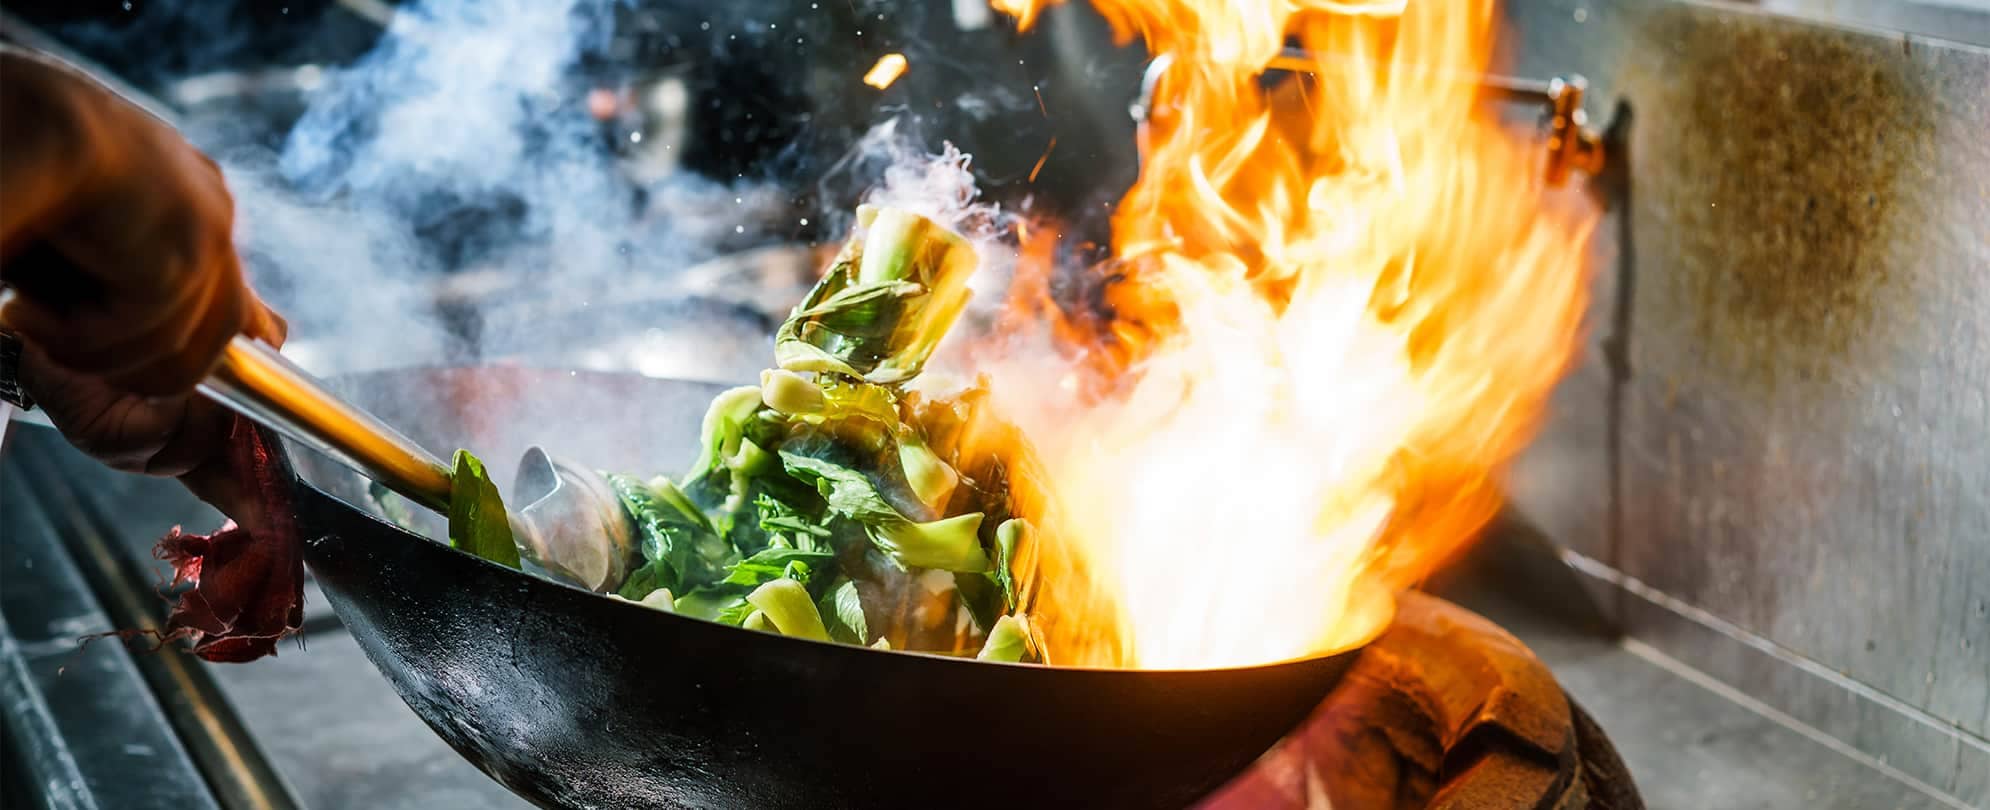 Vegetables being cooked in a wok at Riverhorse On Main, a restaurant in Park City, Utah.